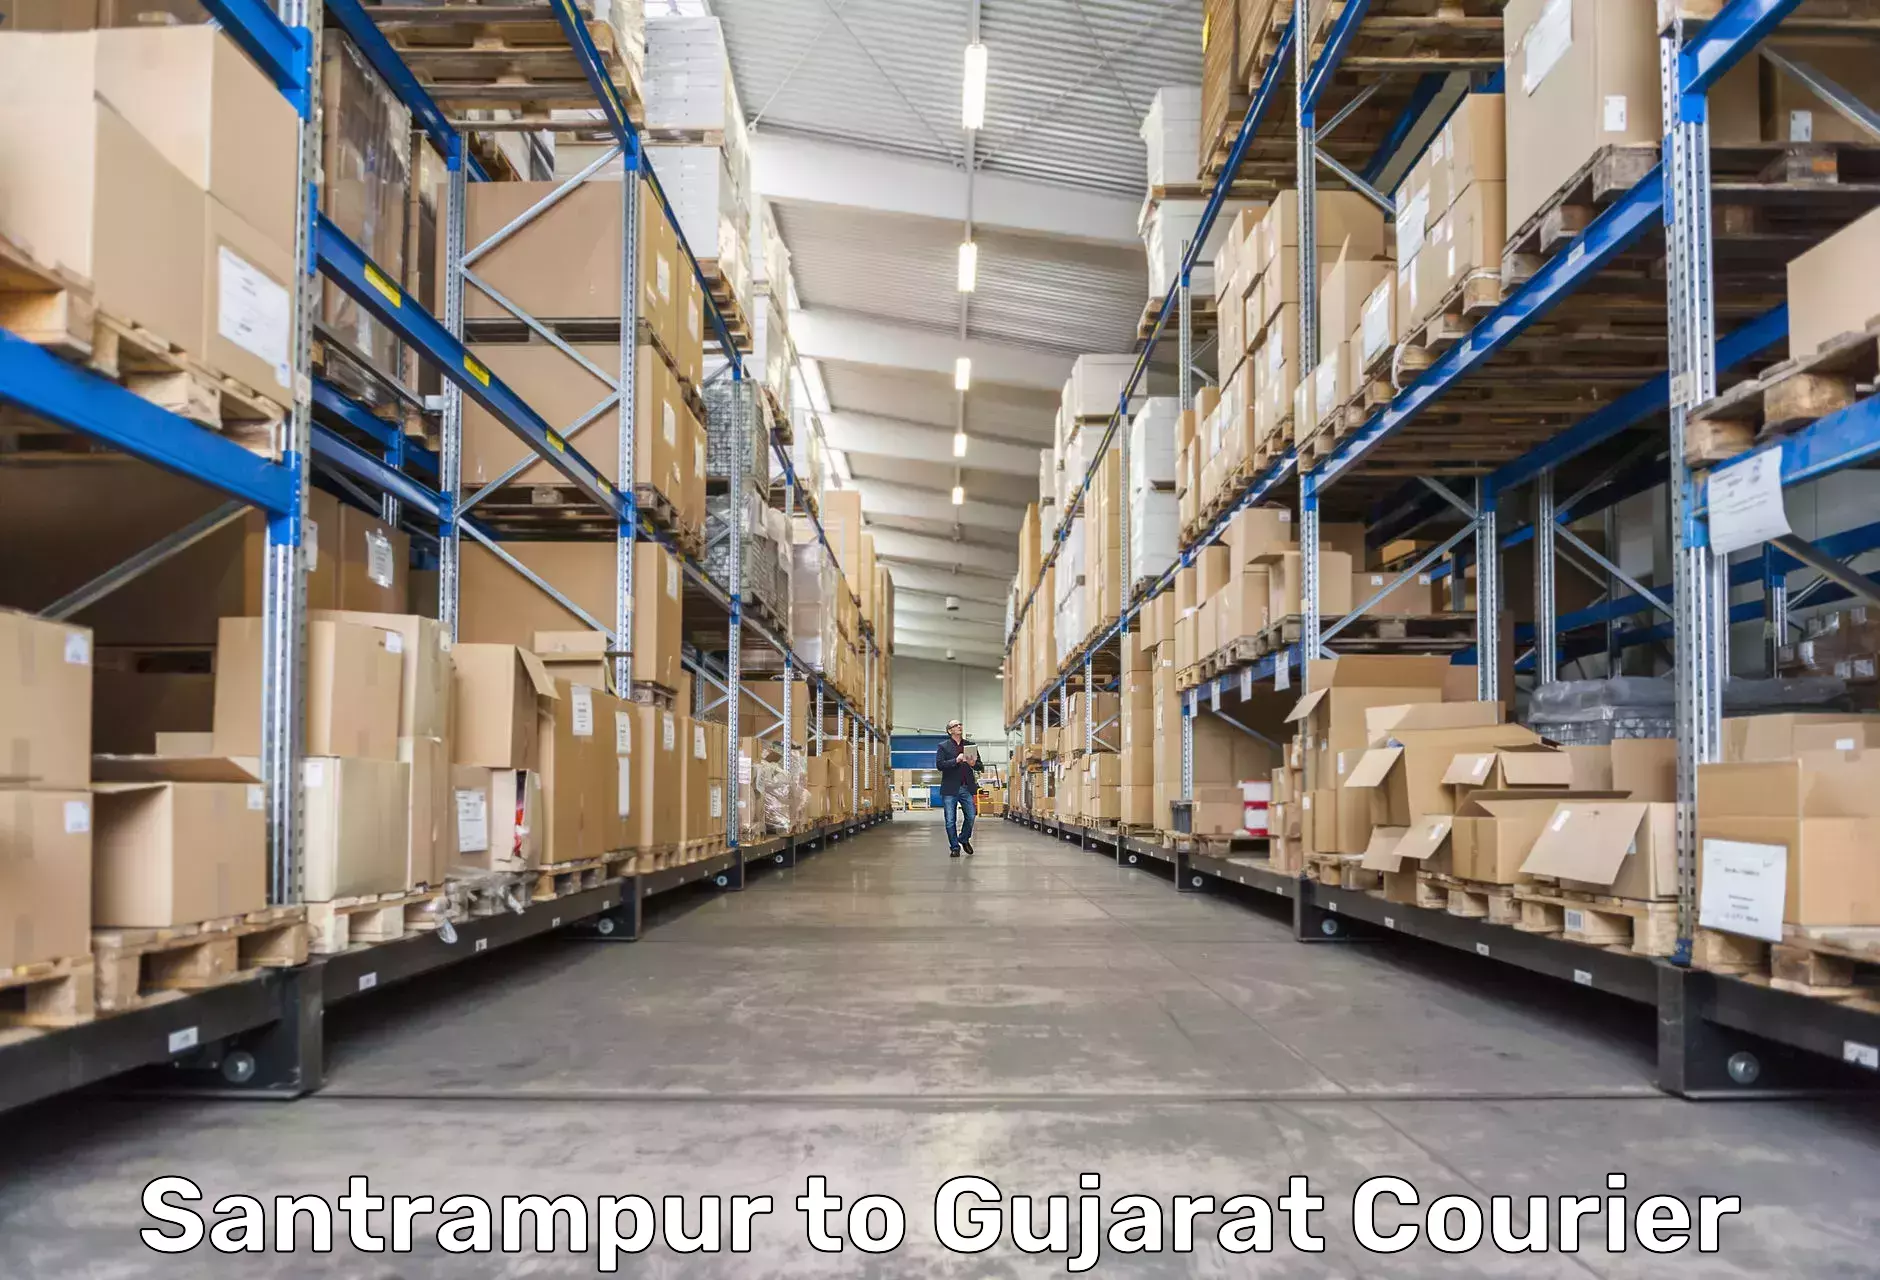 Customizable delivery plans Santrampur to GIDC